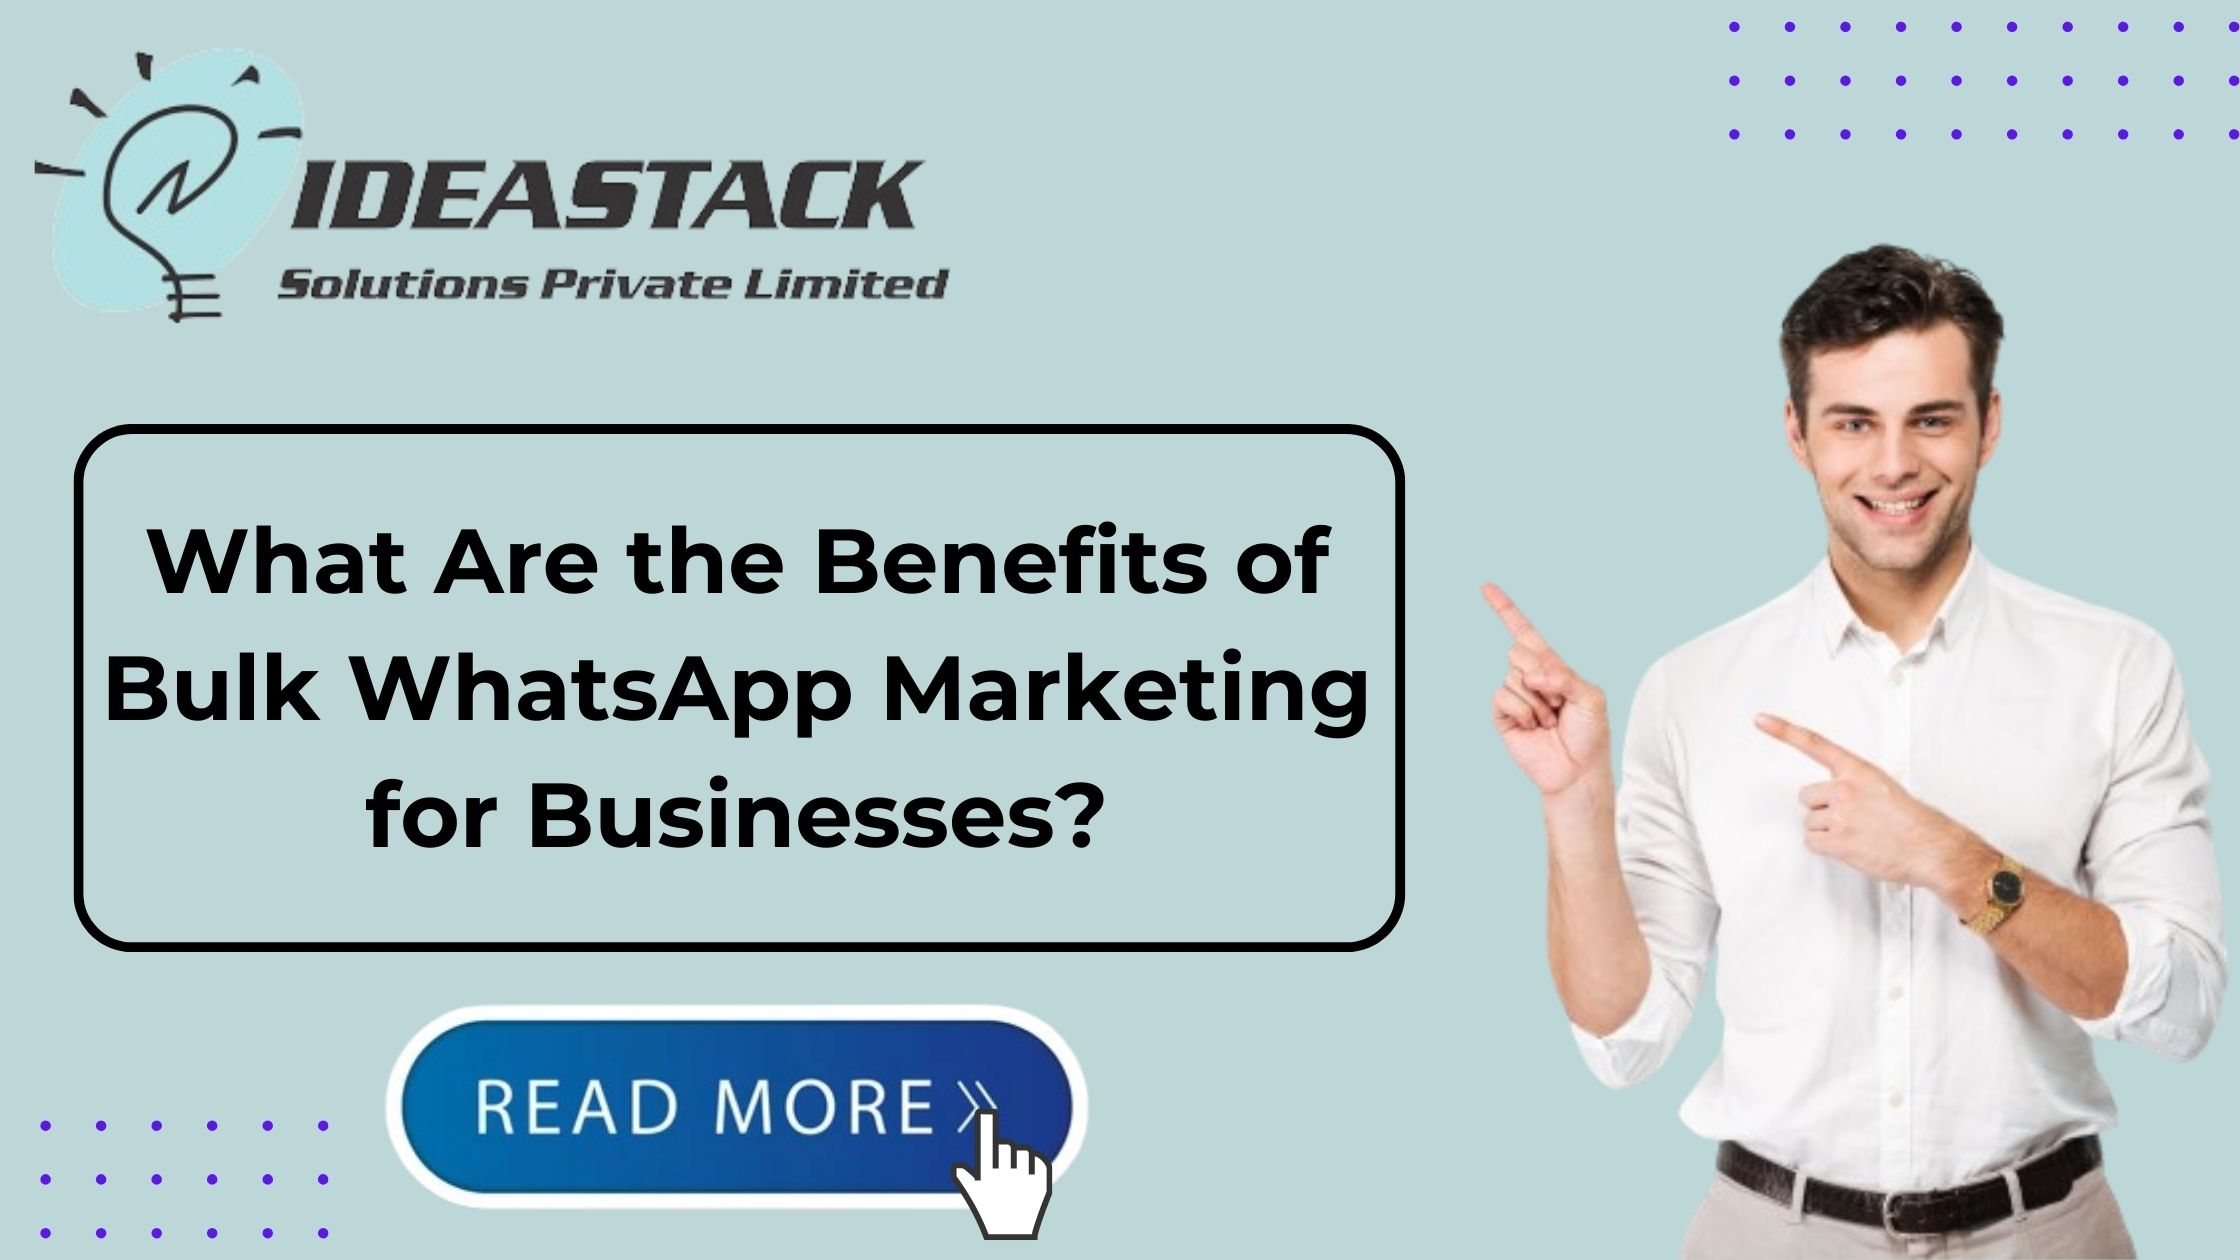 What Are the Benefits of Bulk WhatsApp Marketing for Businesses